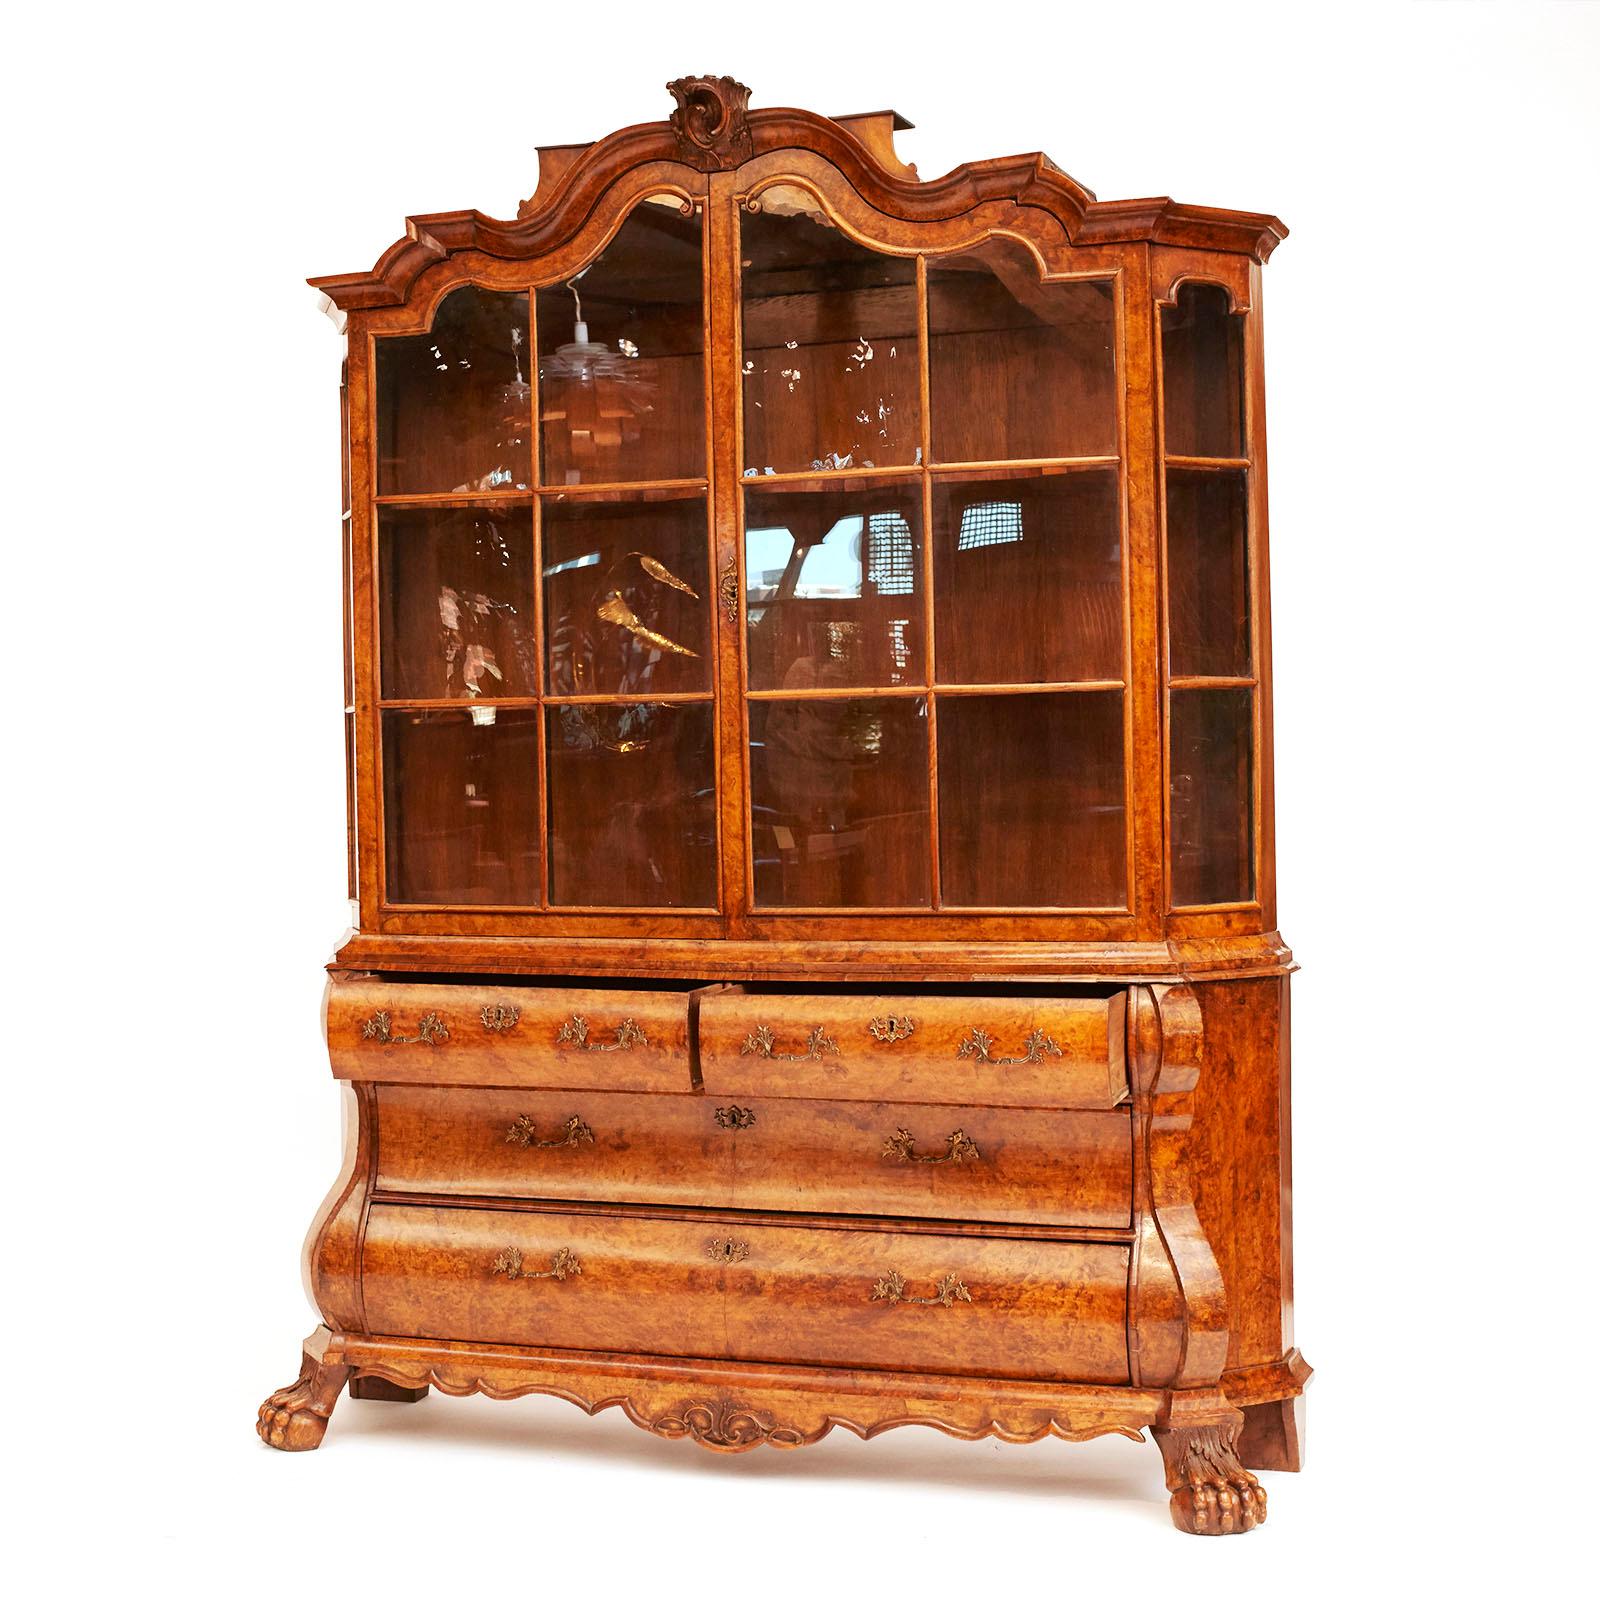 A Dutch Rococo bookcase burl walnut cabinet, circa 1770s, in two parts.

The arched and curved cornice molding above two glazed doors, the lower section with two short drawers above two long drawers of bombé form.
The sides with extended scrolls and